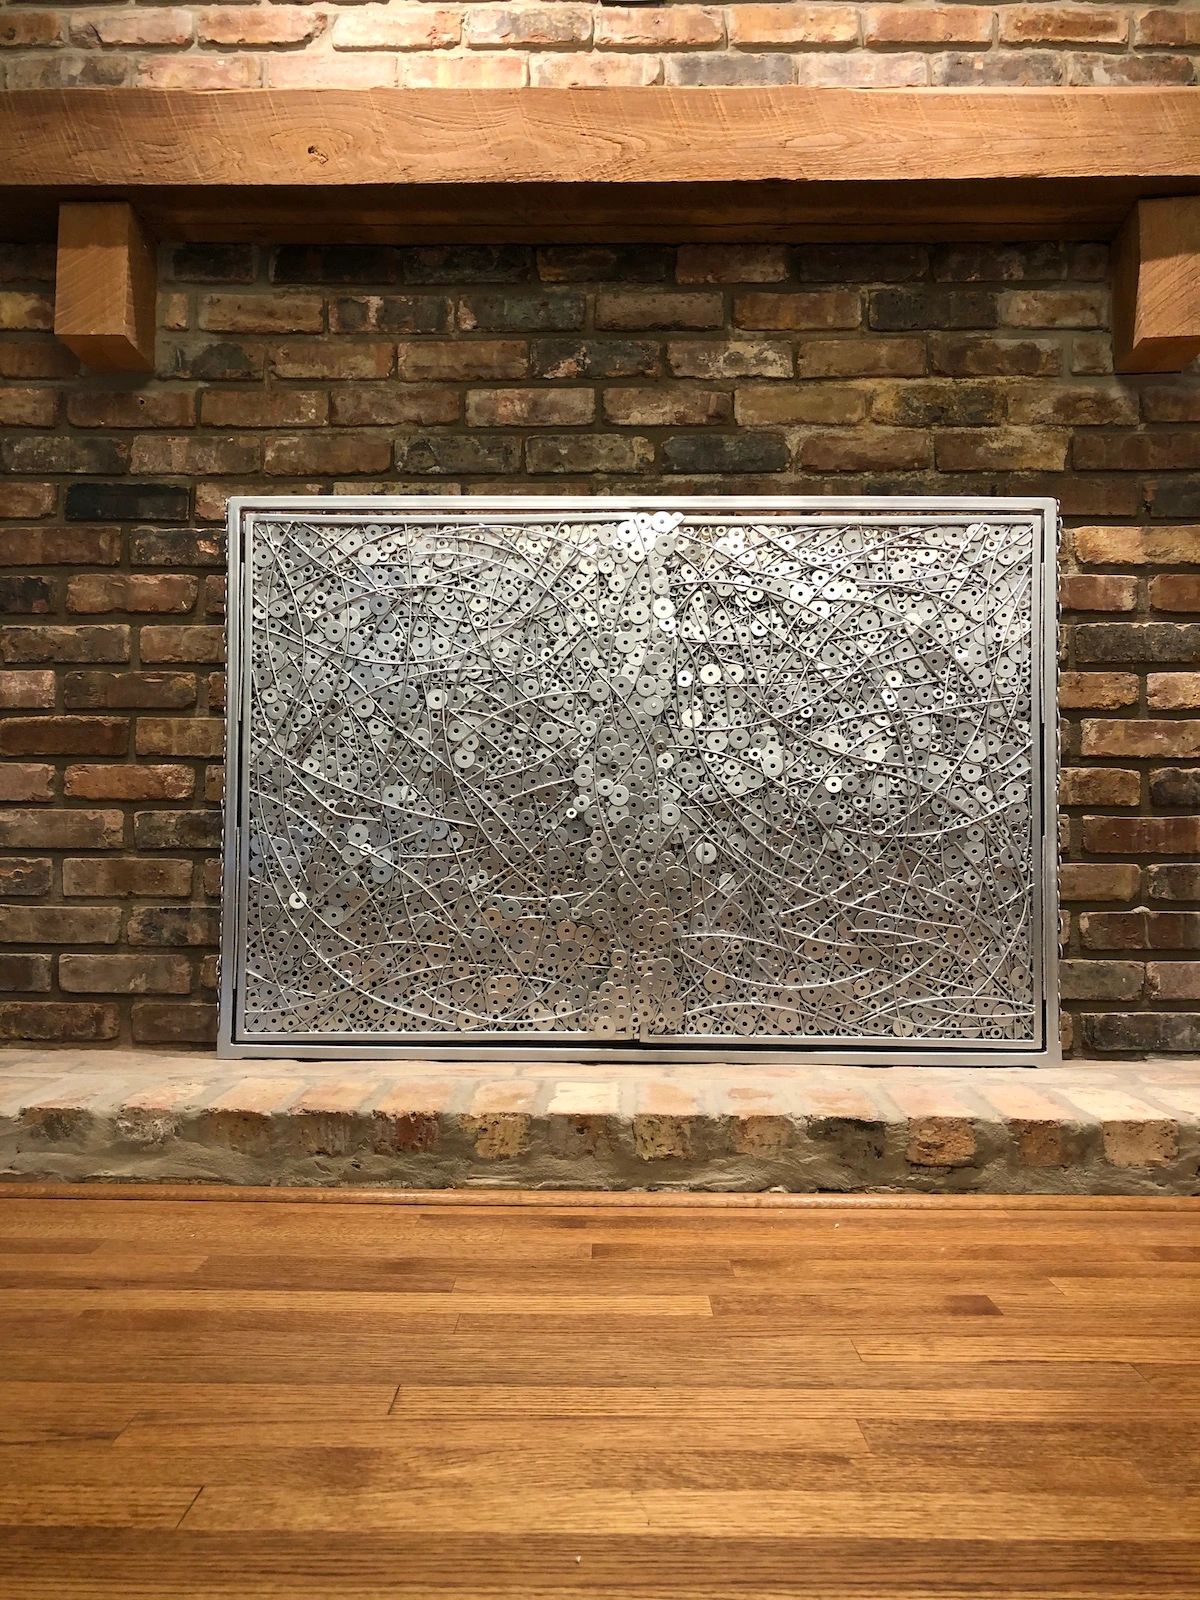 Silver colored fireplace screen created by Tamara Robertson. 